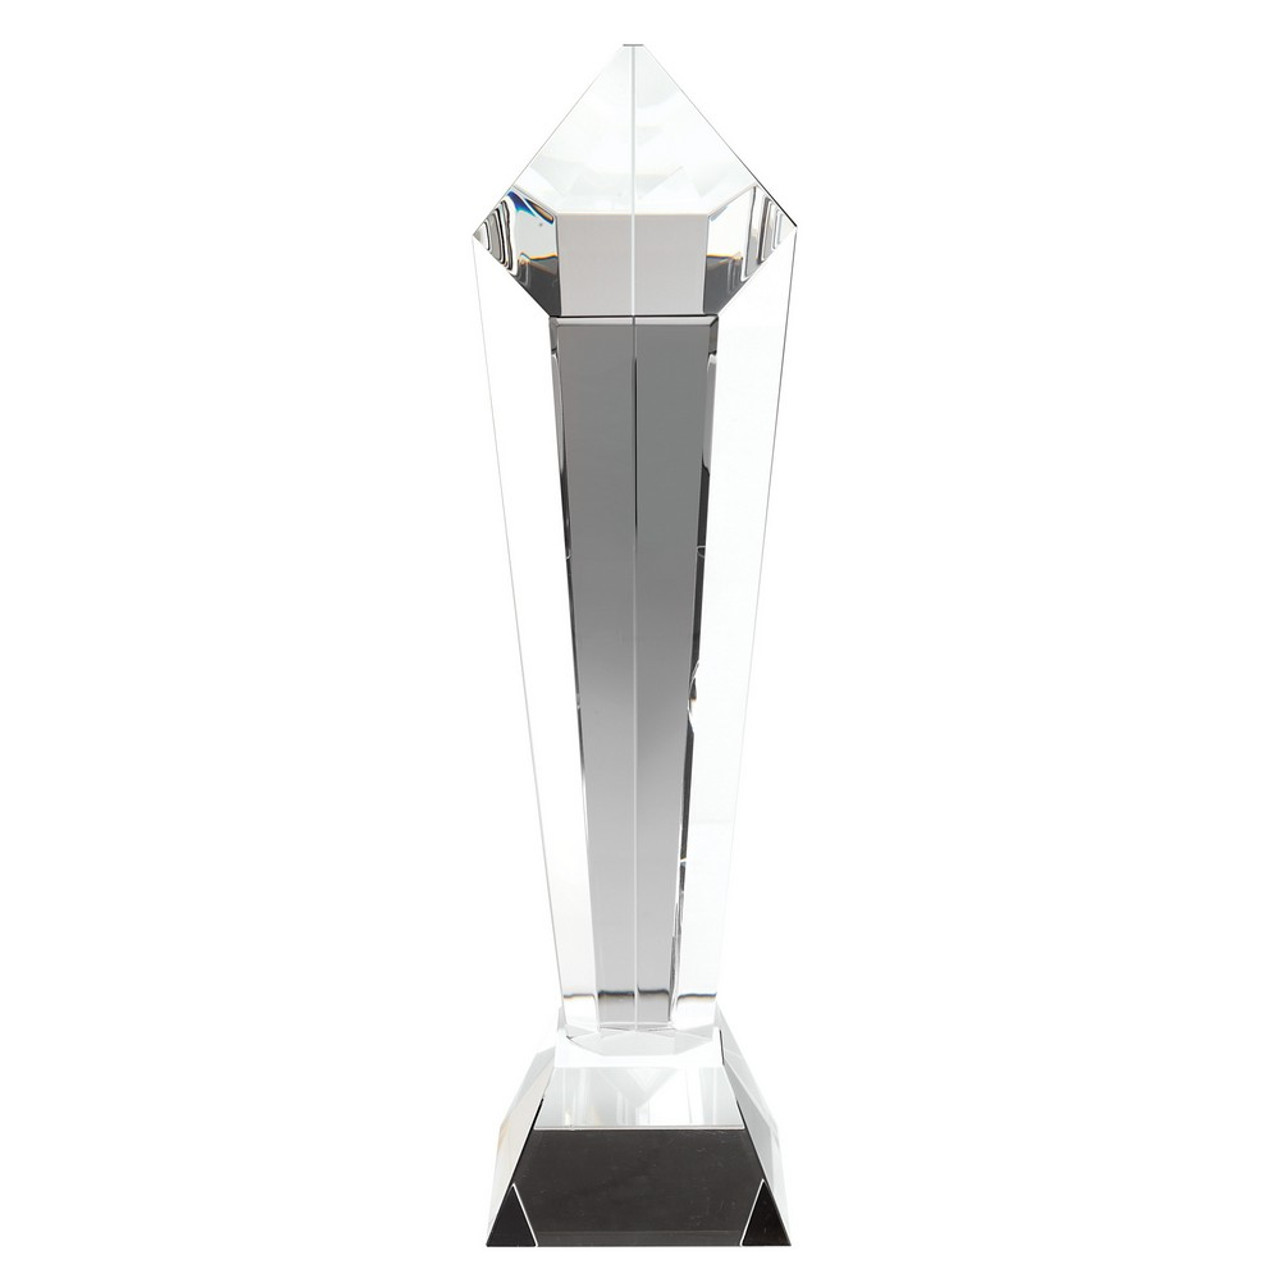 Premium Glass Award available in 2 sizes with optional glass engraving.